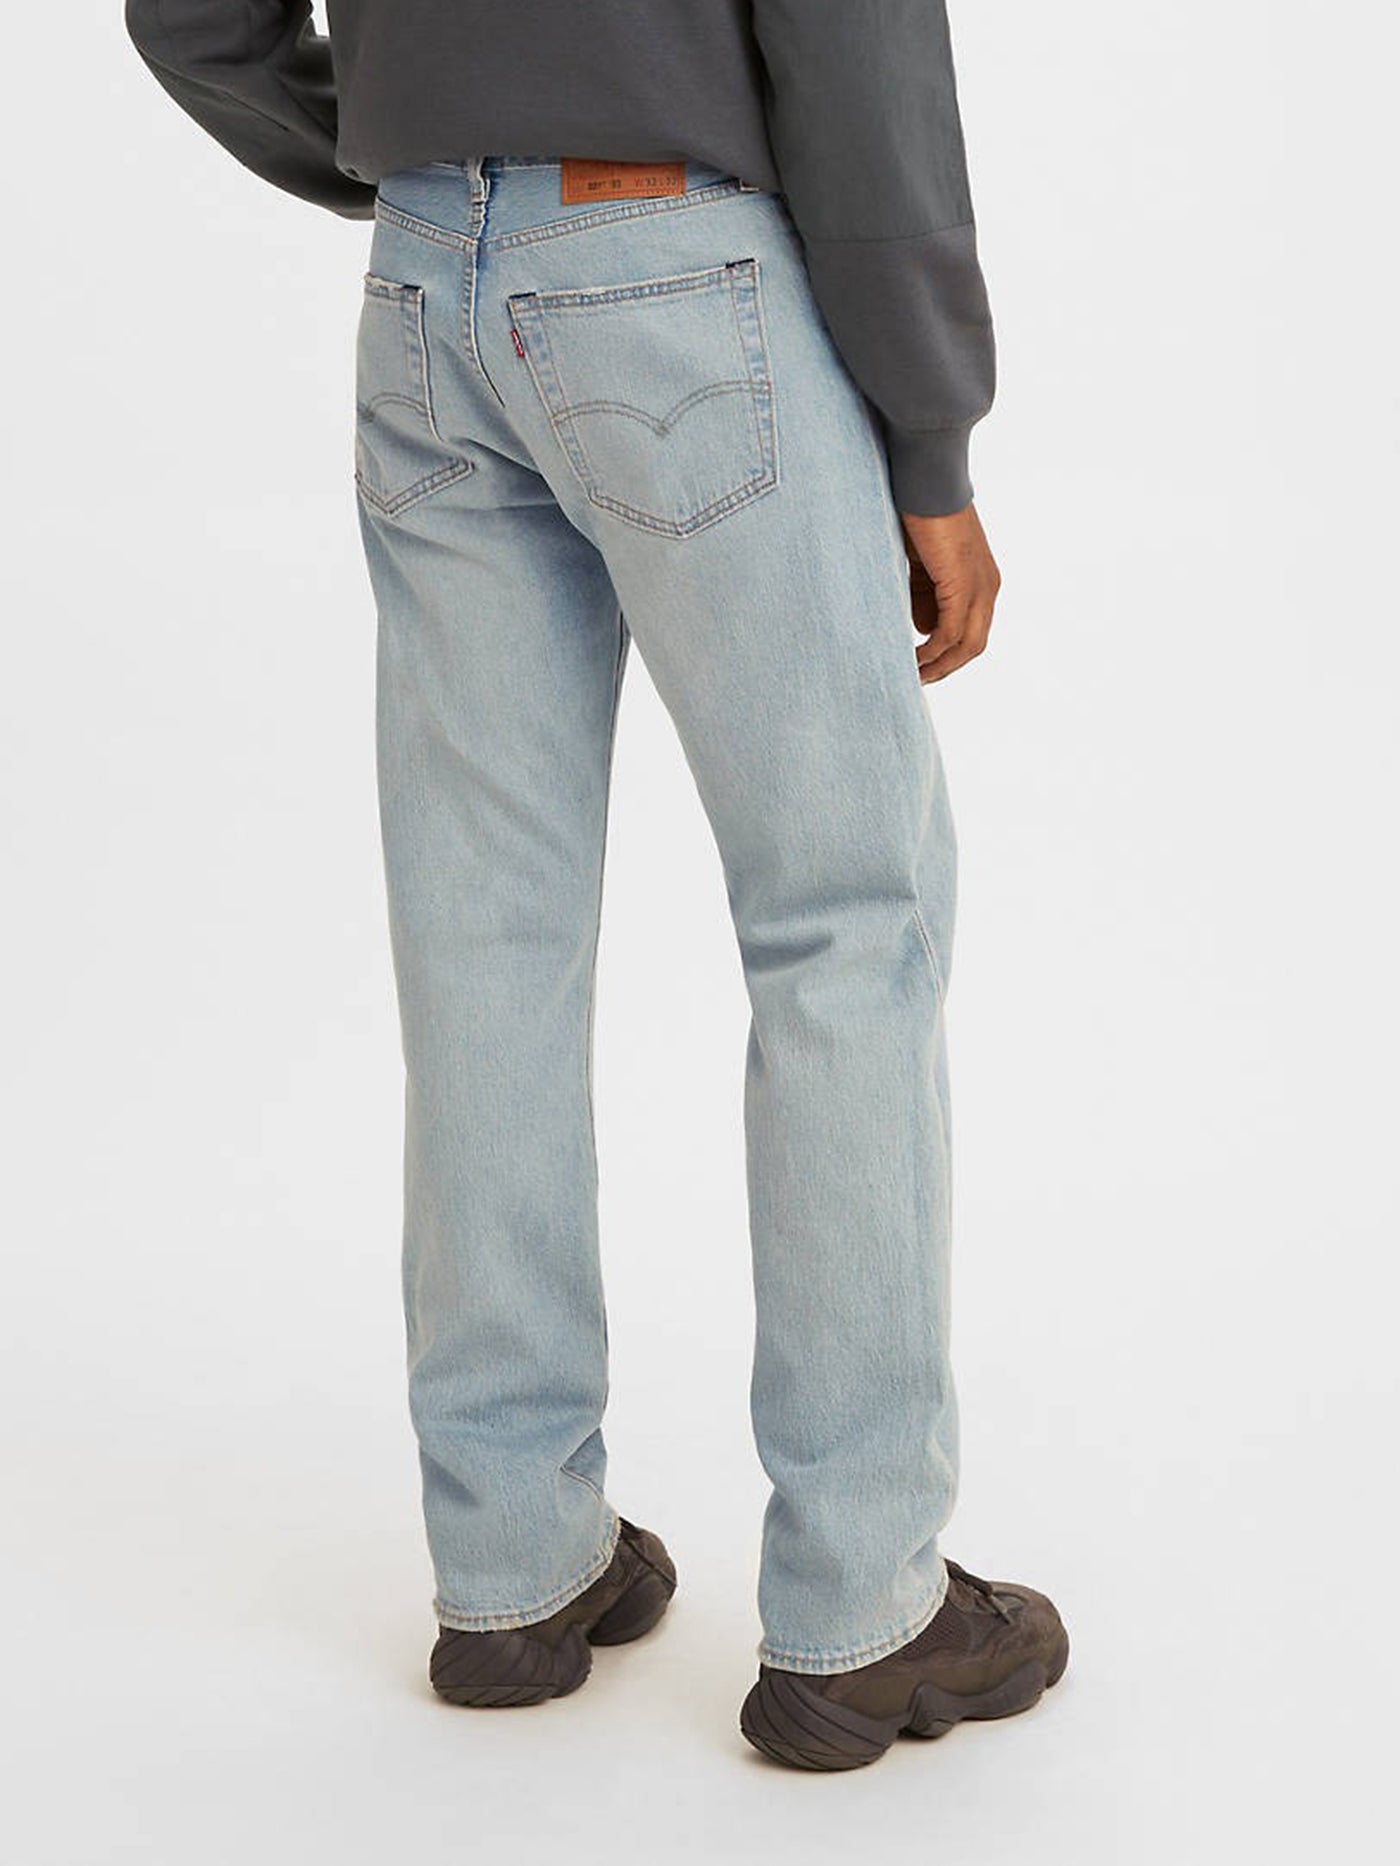 Levis 501 '93 Straight Fit Jeans